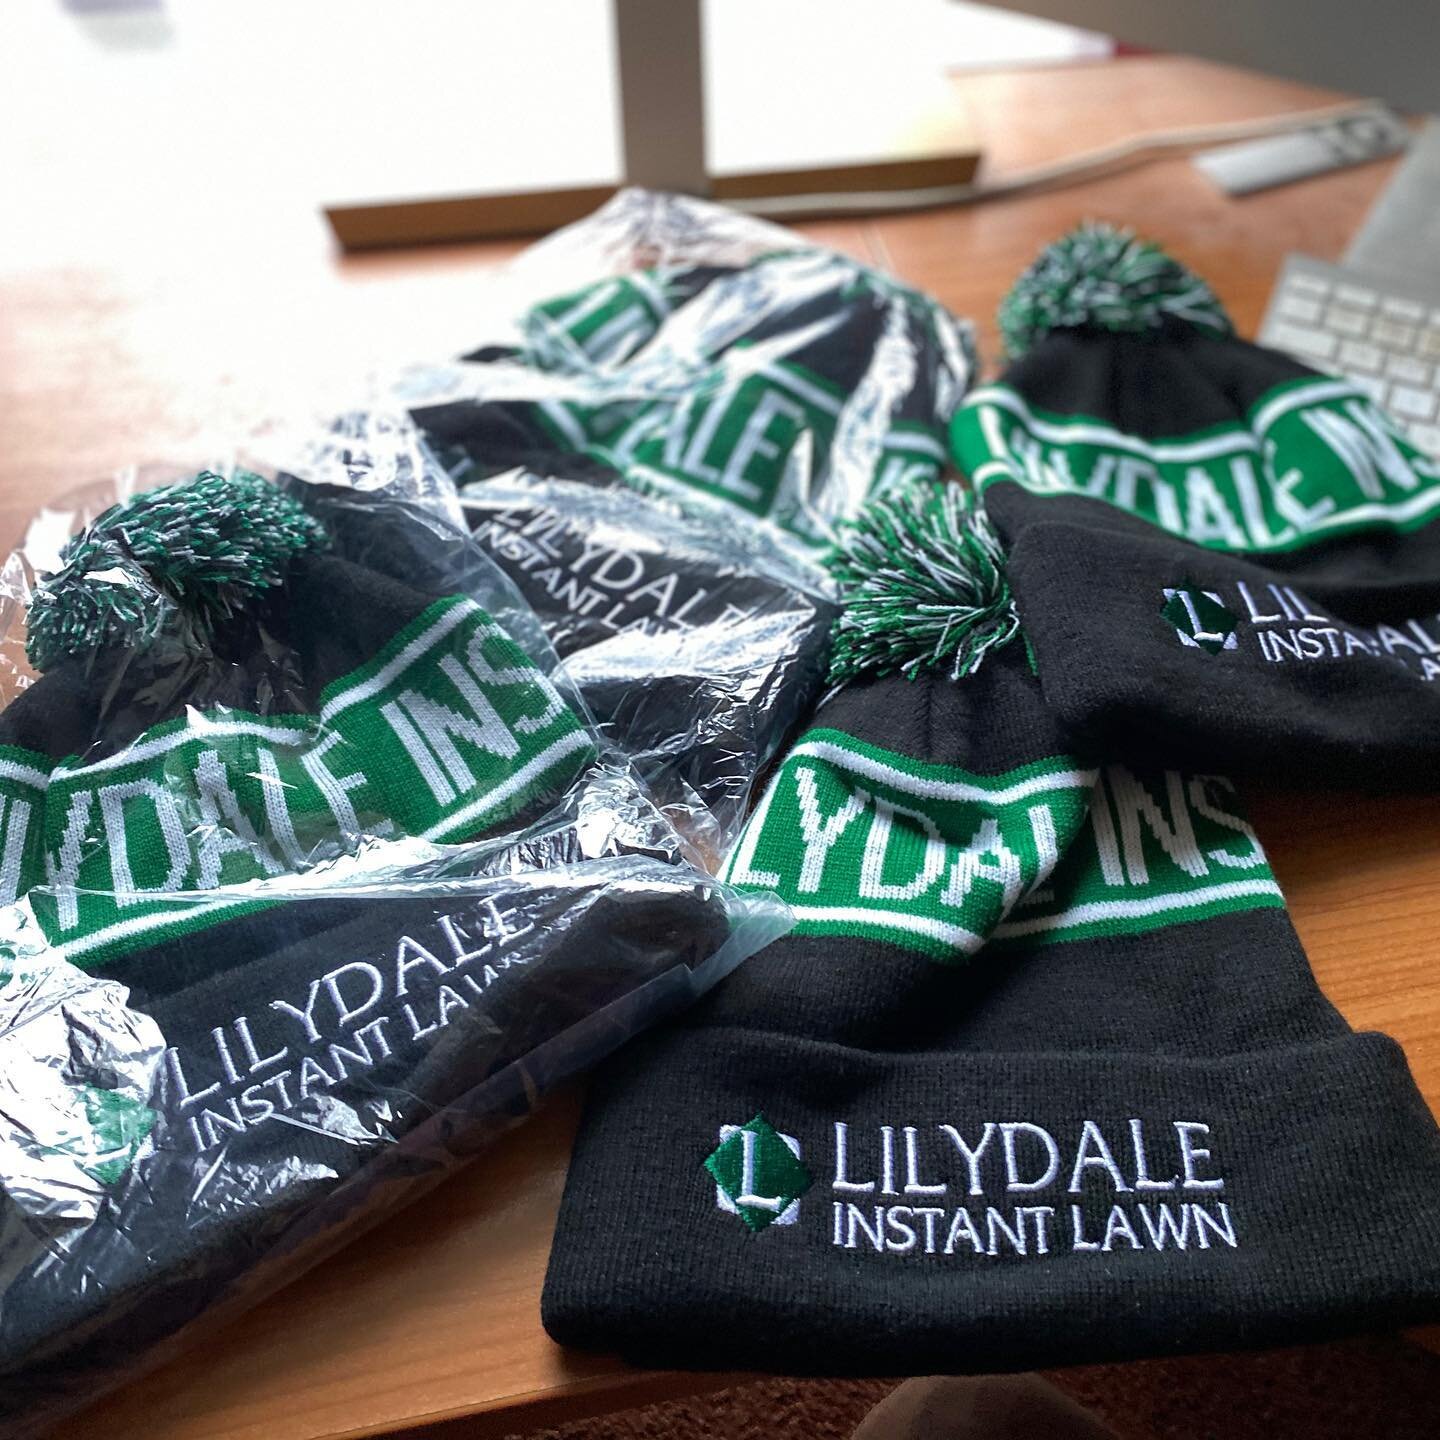 @lilydalelawn providing the goods 😍 
We have been dealing with Lilydale Lawn for nearly 10 years and they have never disappointed.
If you guys need turf this is definitely the place to get it ✅